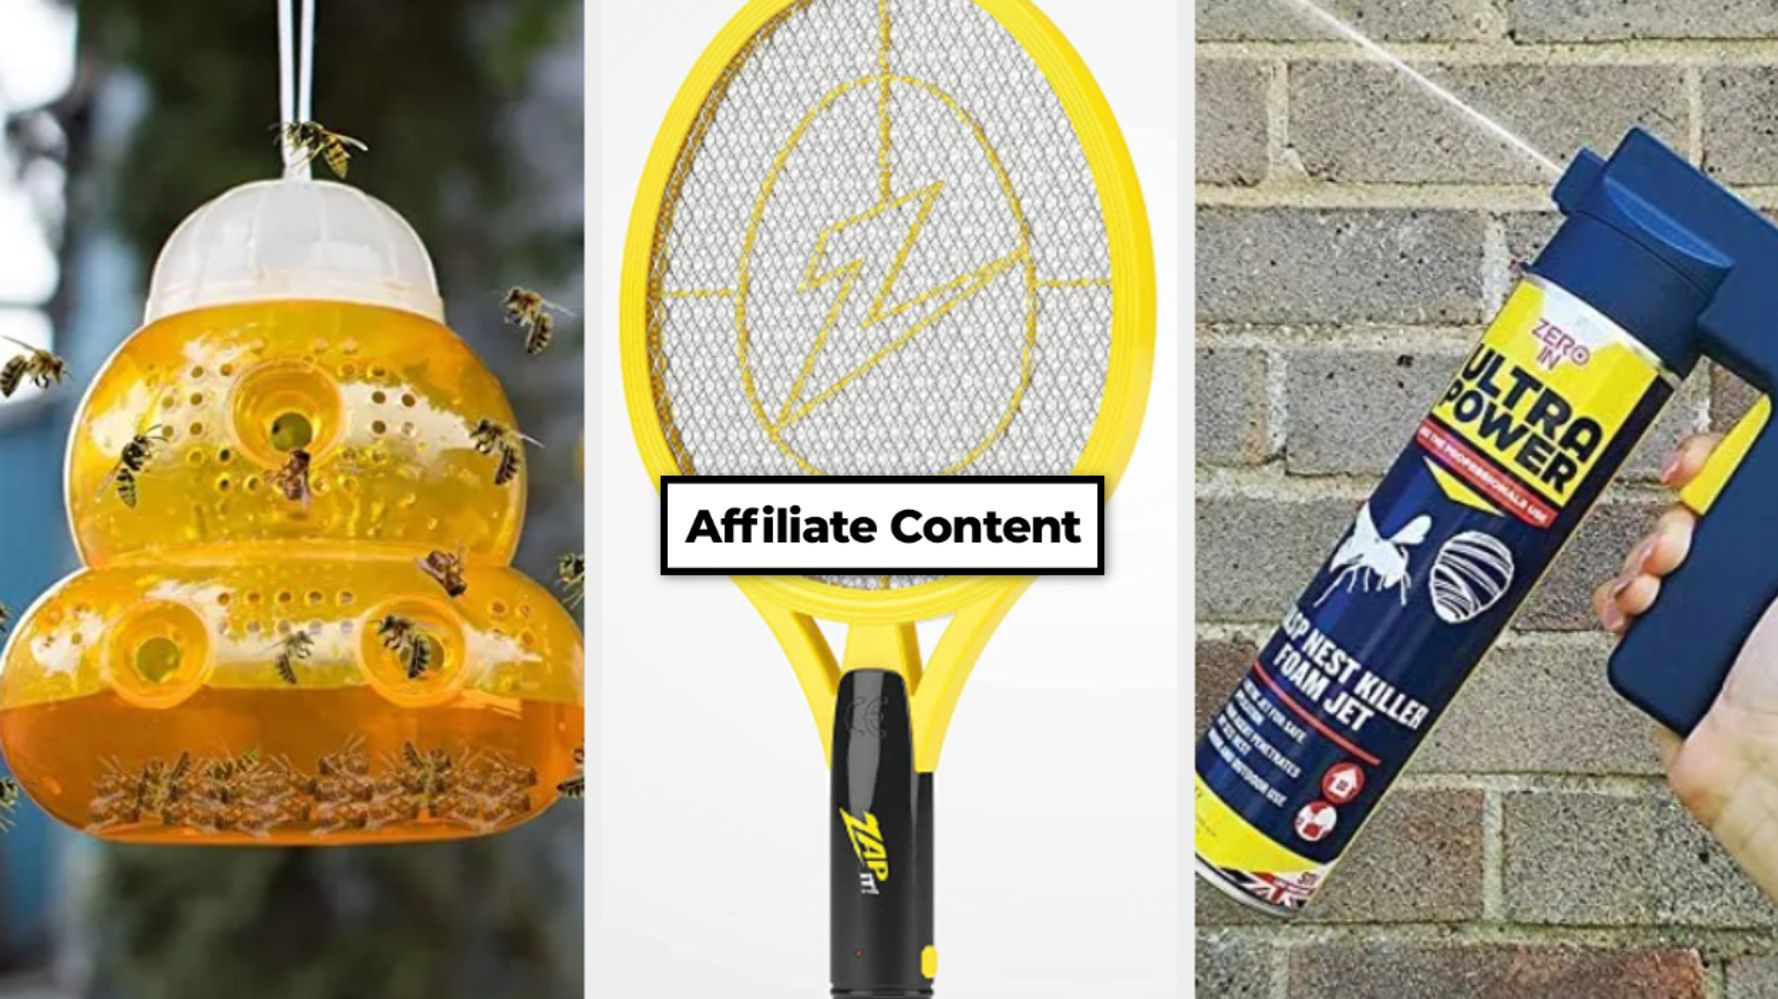 14 Clever Pest Control Products You Need In Your Life This Summer